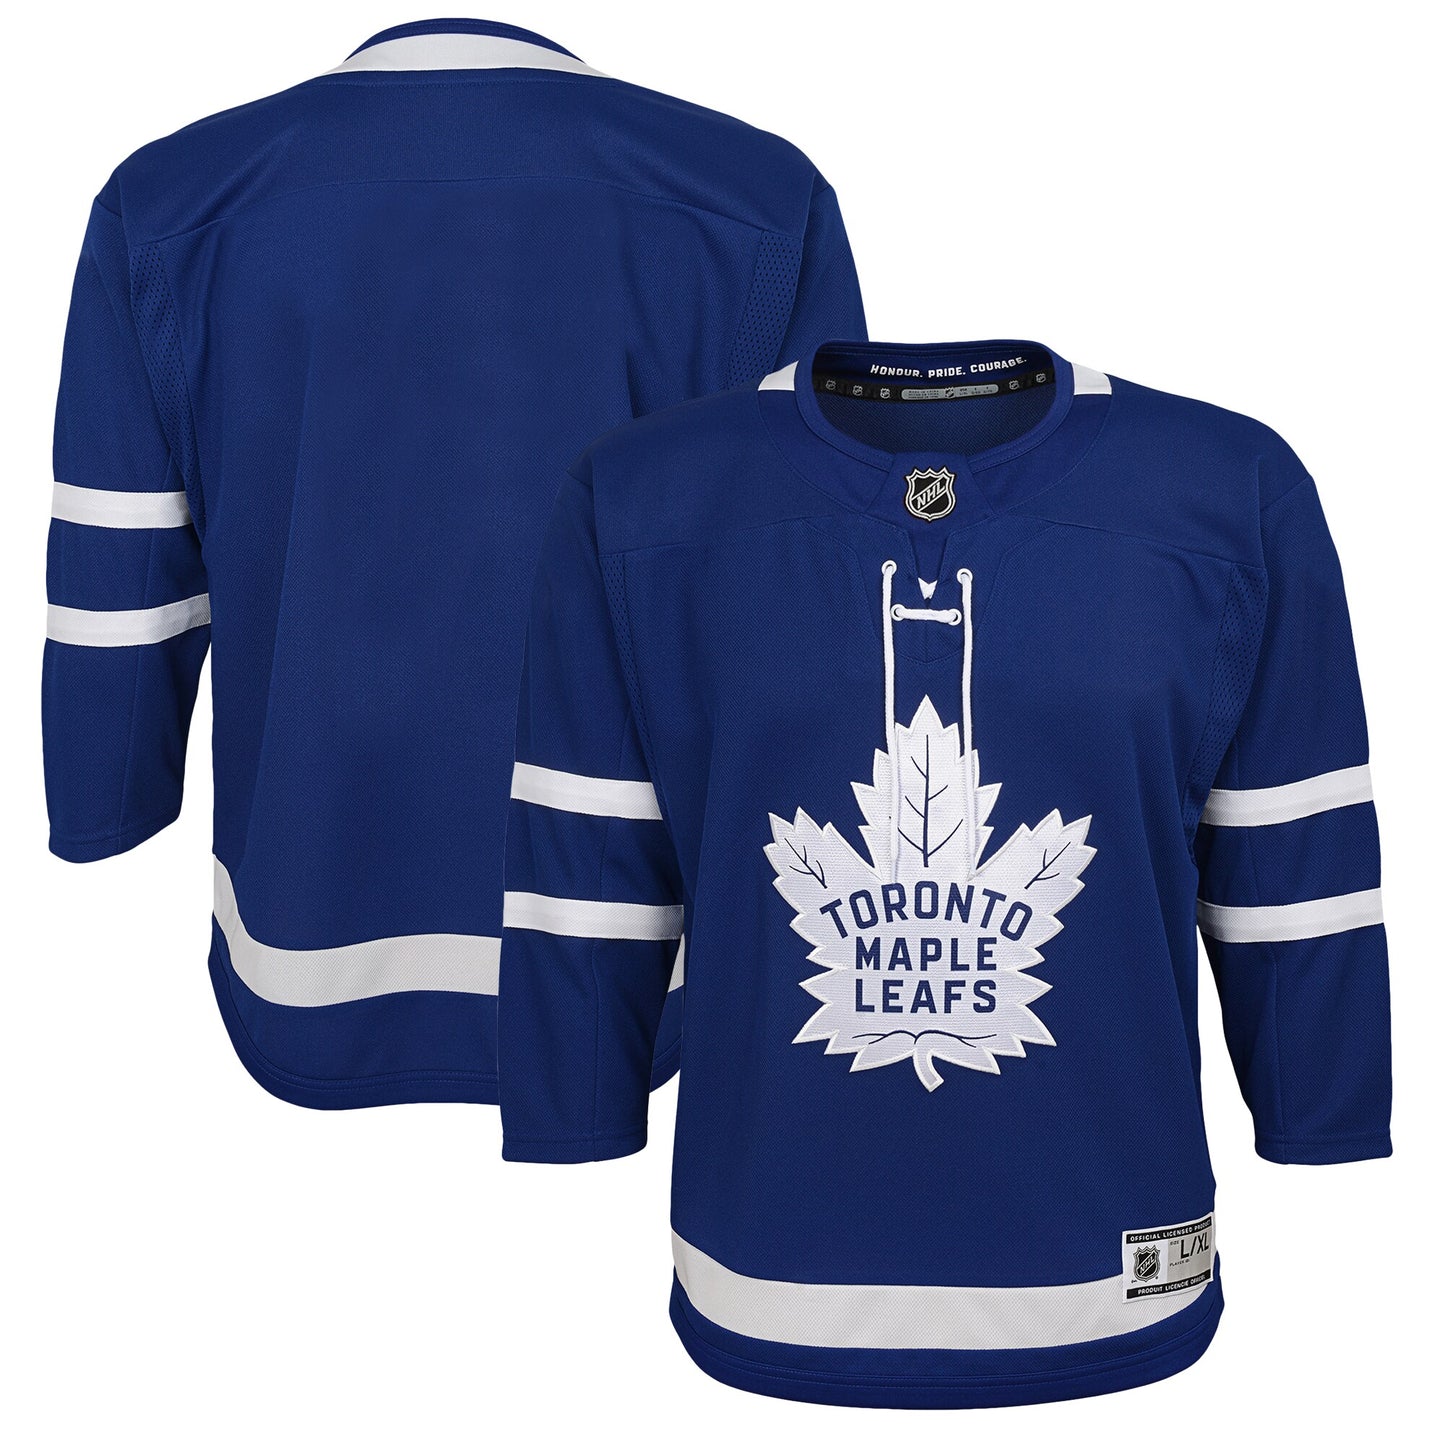 Toronto Maple Leafs Youth Home Premier Jersey - Blue